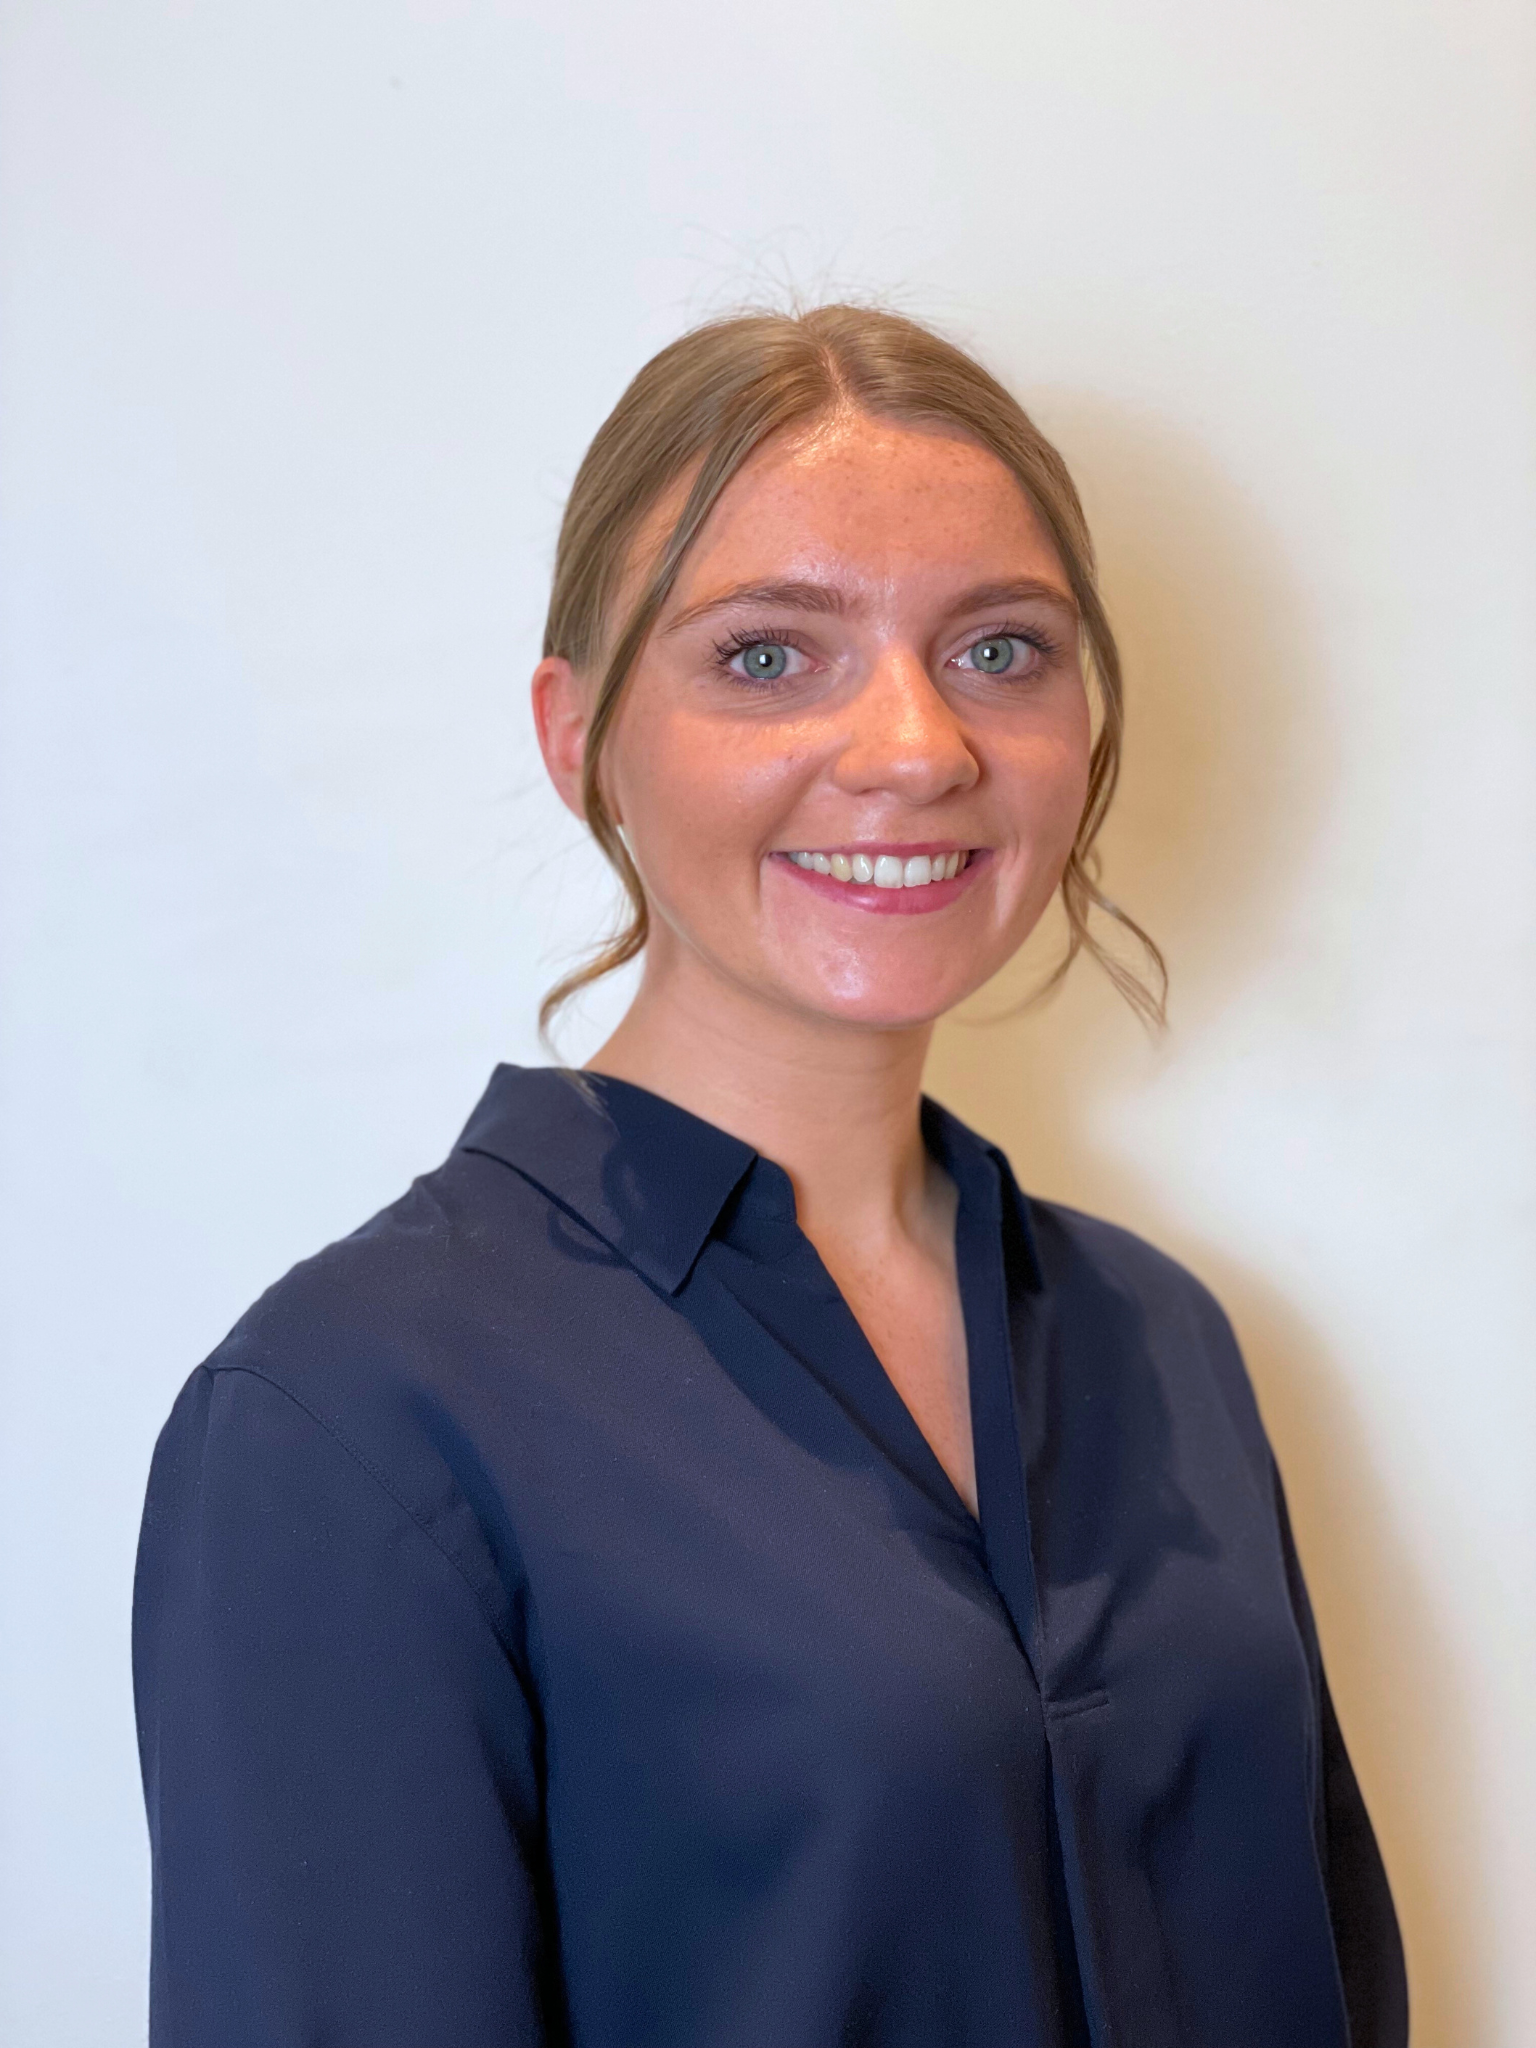 Profile Photo: Caitlin Jeanes is a physiotherapist in Newstead Brisbane